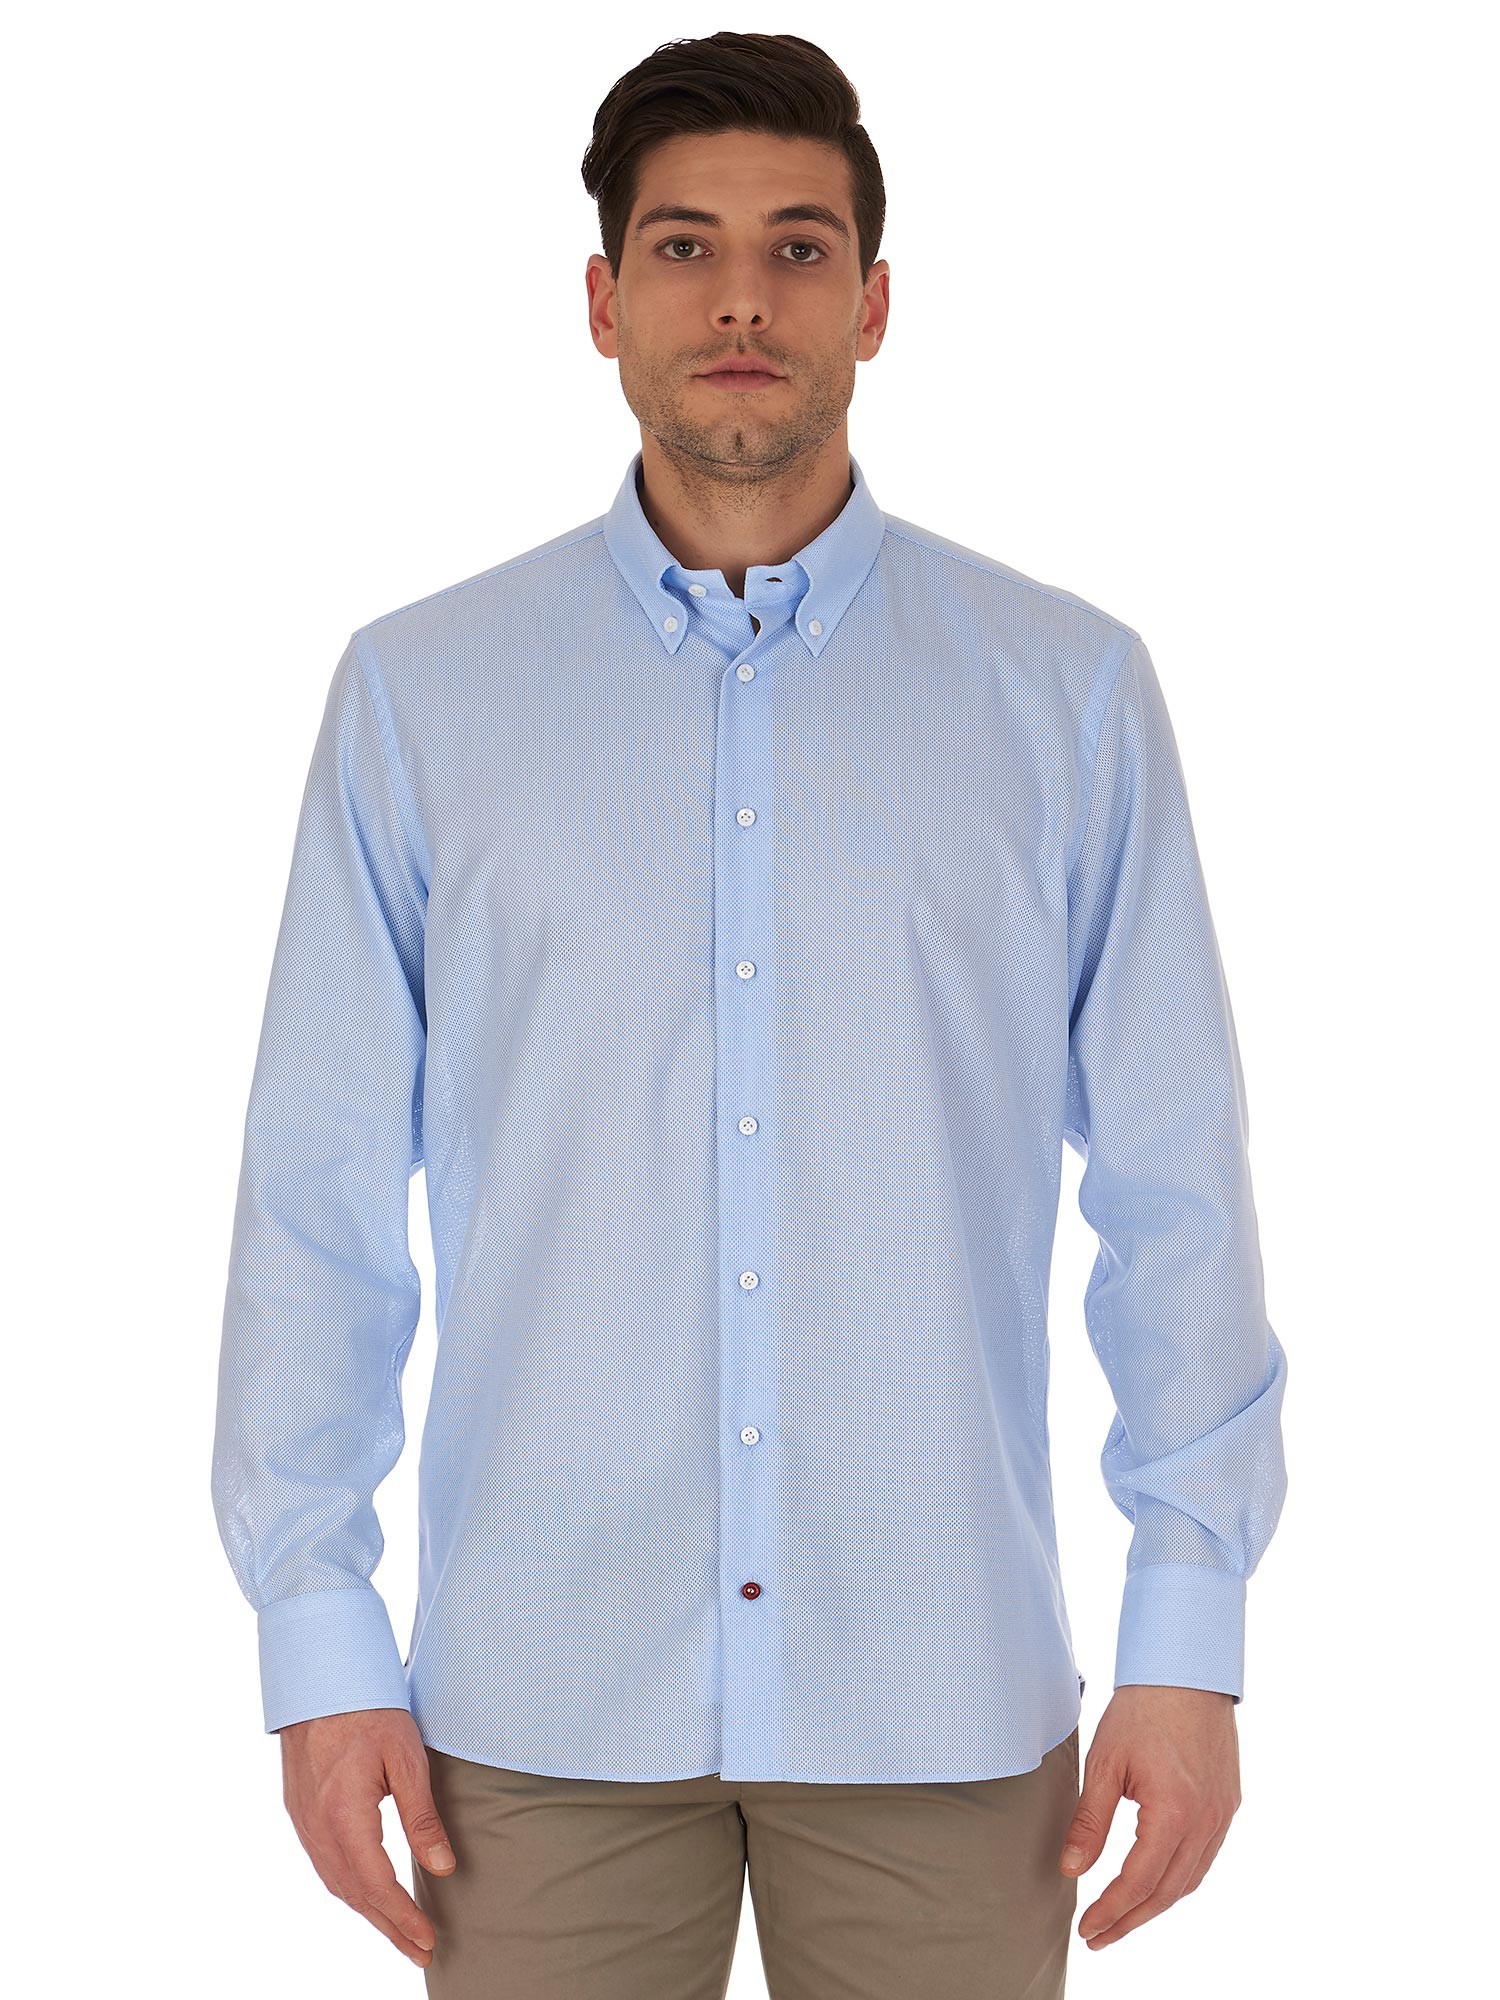 Shirt in cellular fabric with a button-down collar by Càrrel